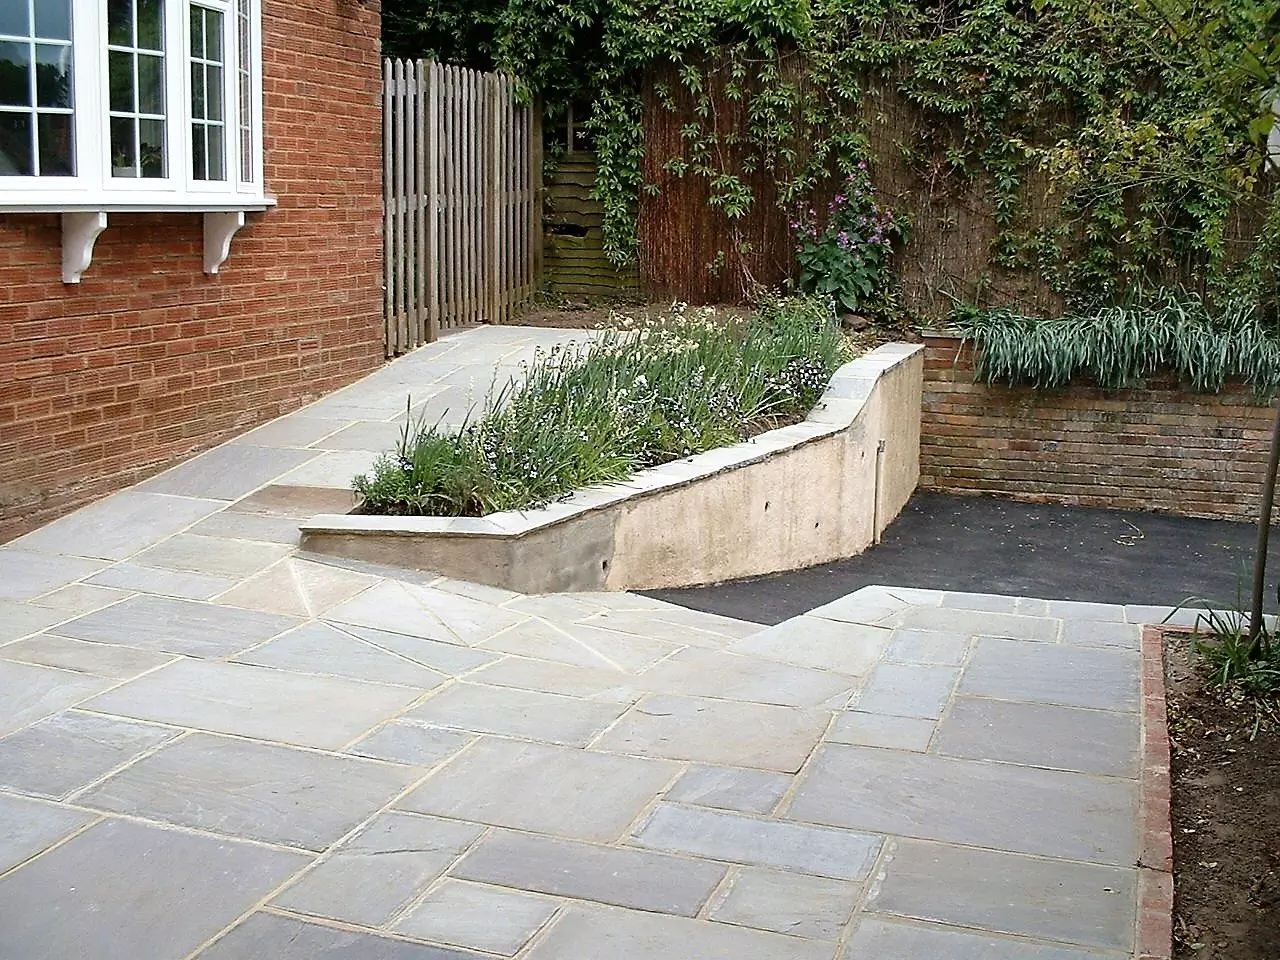 Redesigning your new home's driveway - Block Paving Driveways Maidstone and Kent